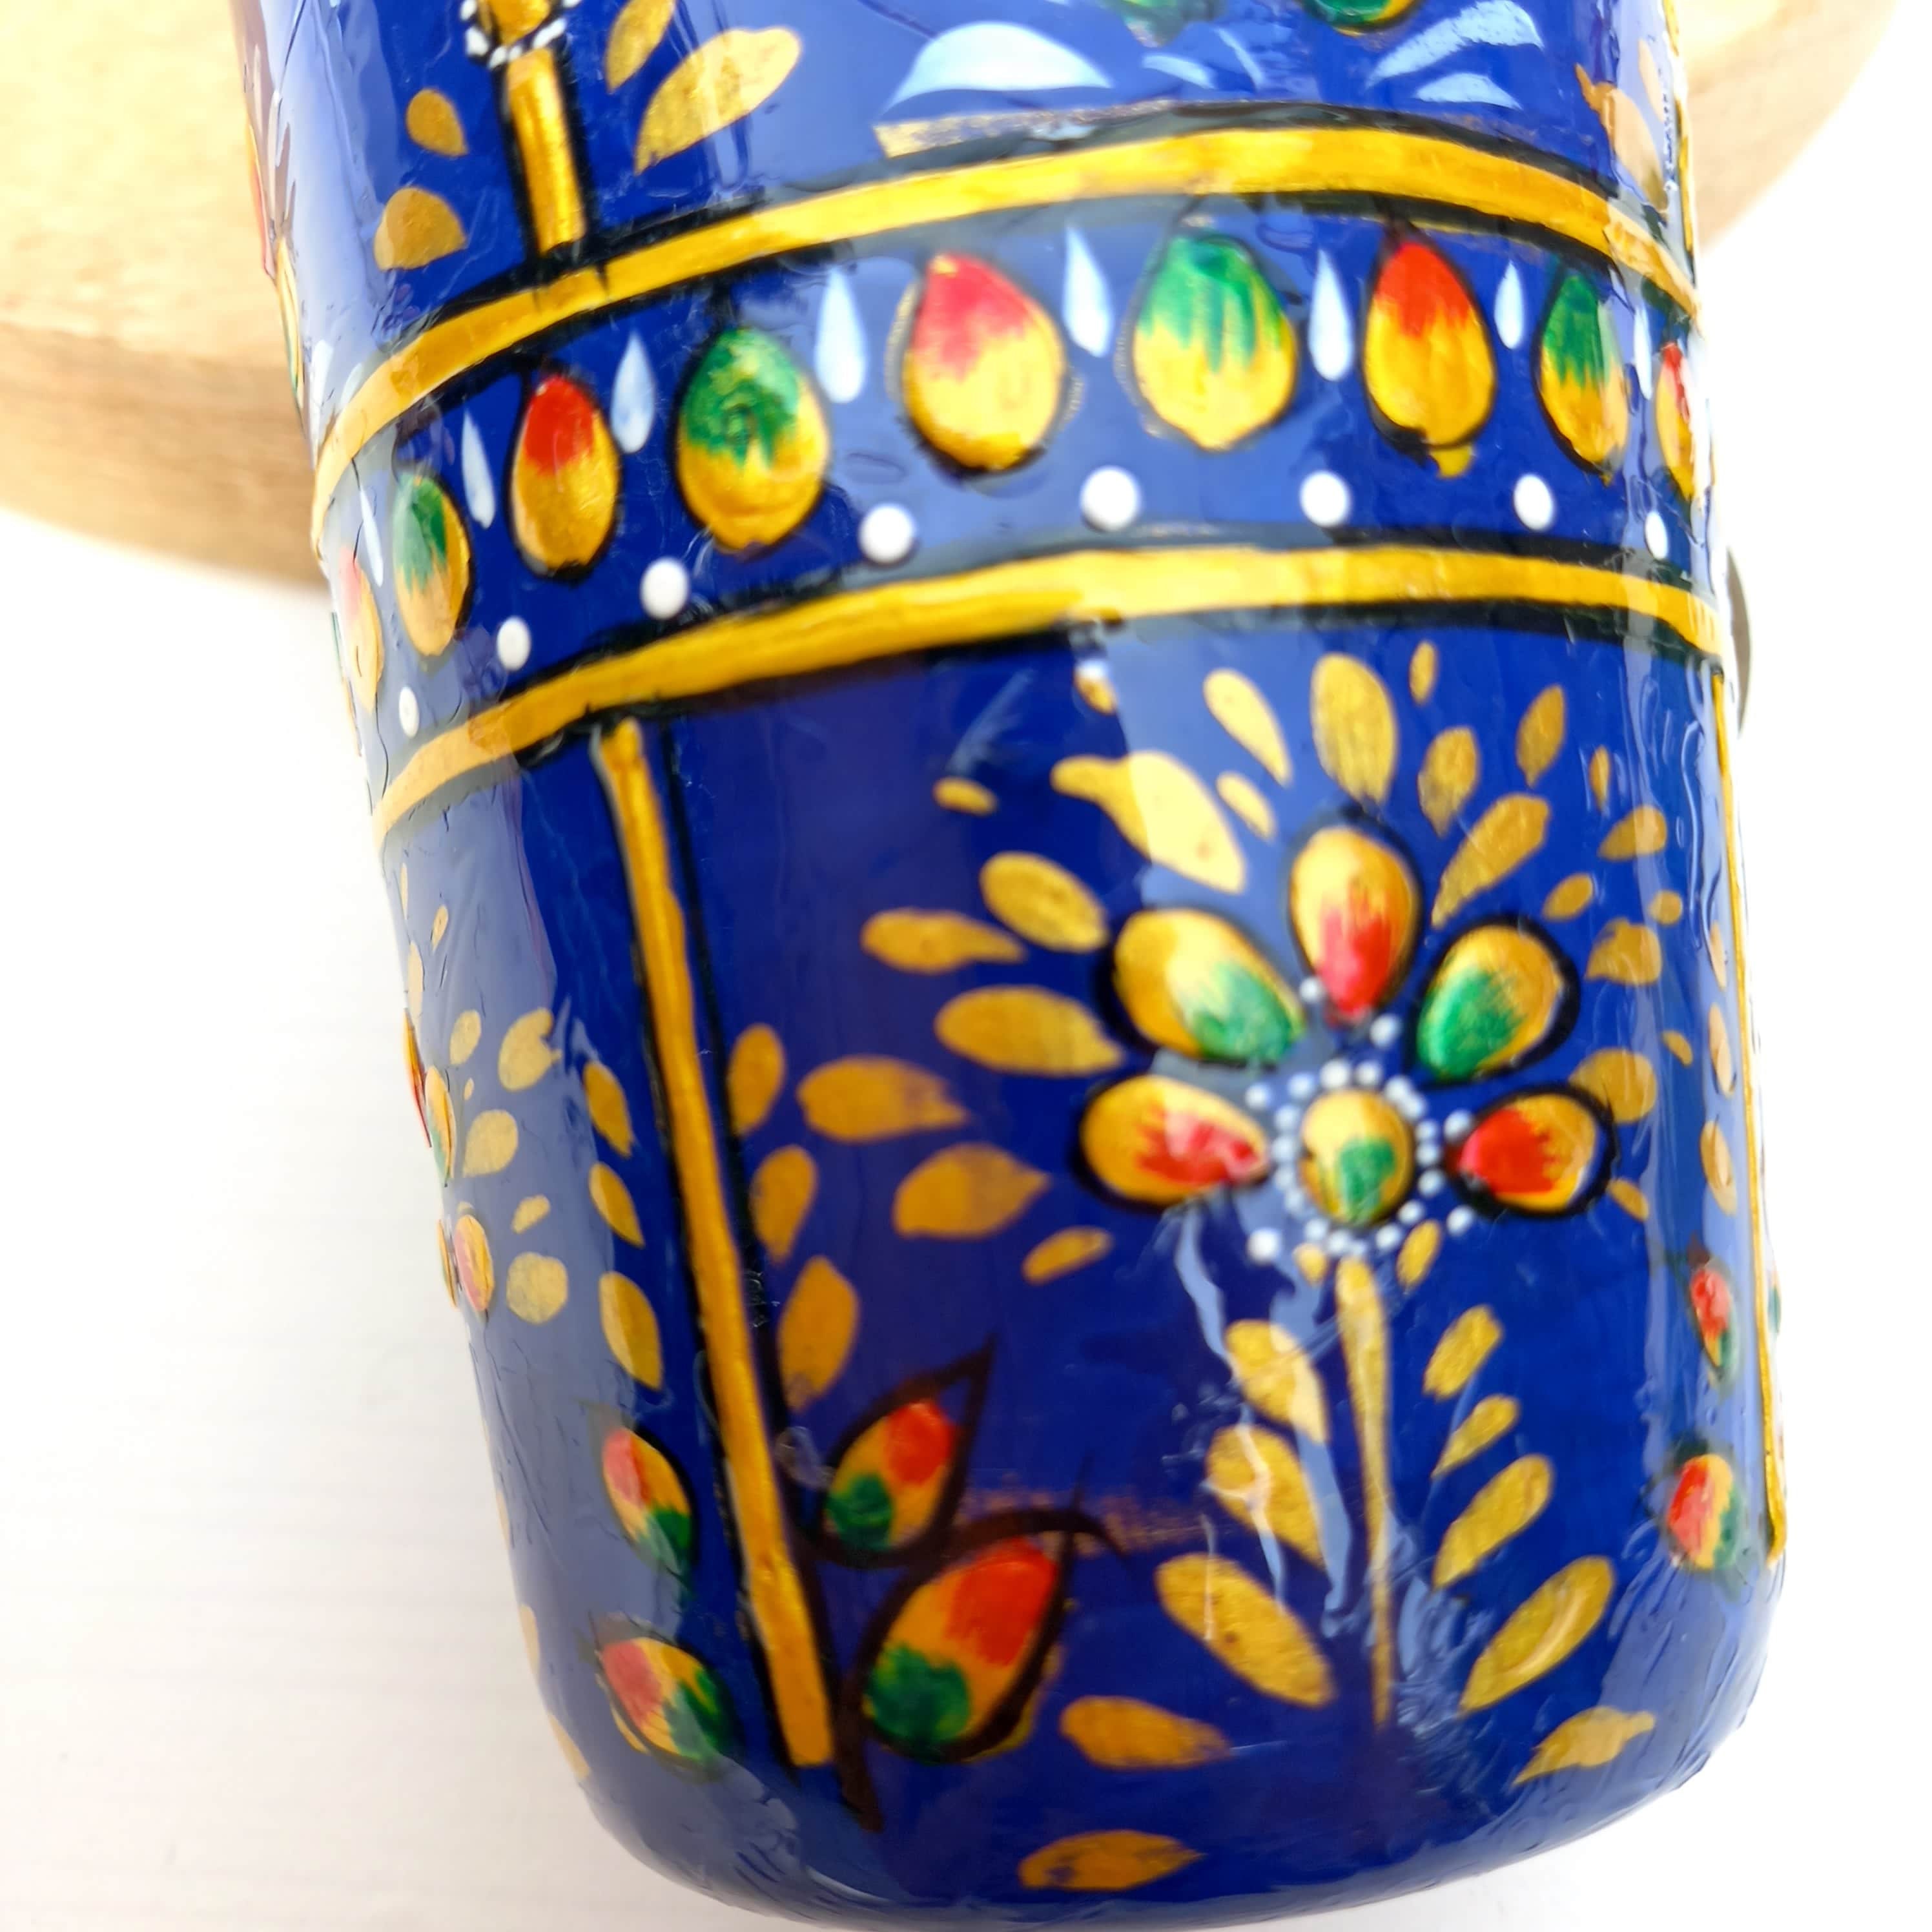 Stainless Steel Cups bhanga / Enamel-coated and Hand-decorated